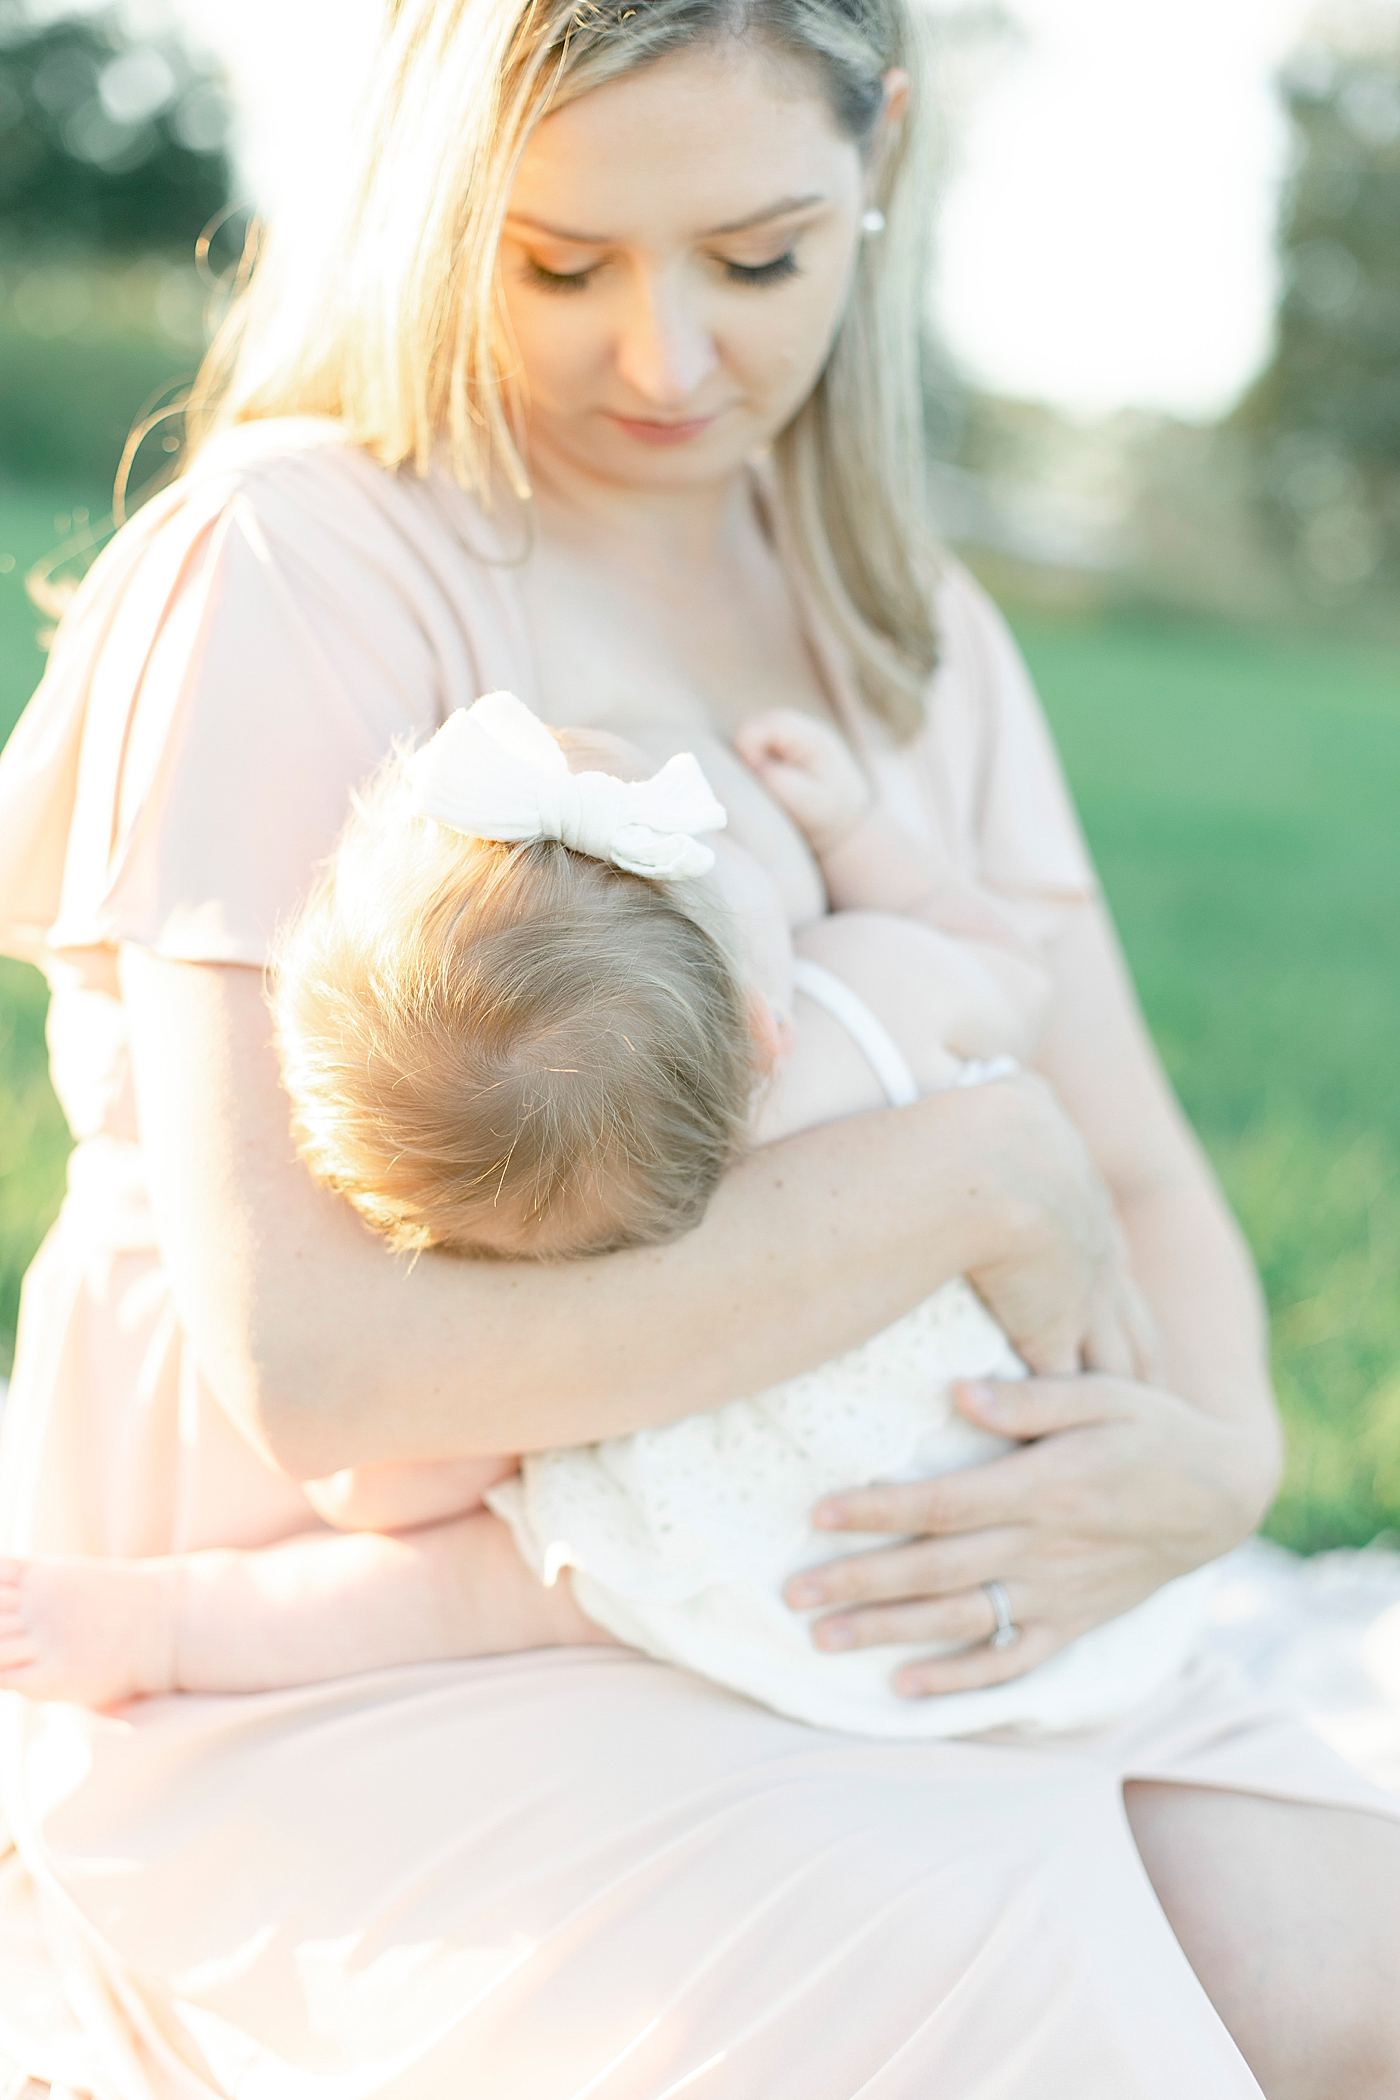 Baby nursing while sitting in the grass with mom | Photo by Little Sunshine Photography 